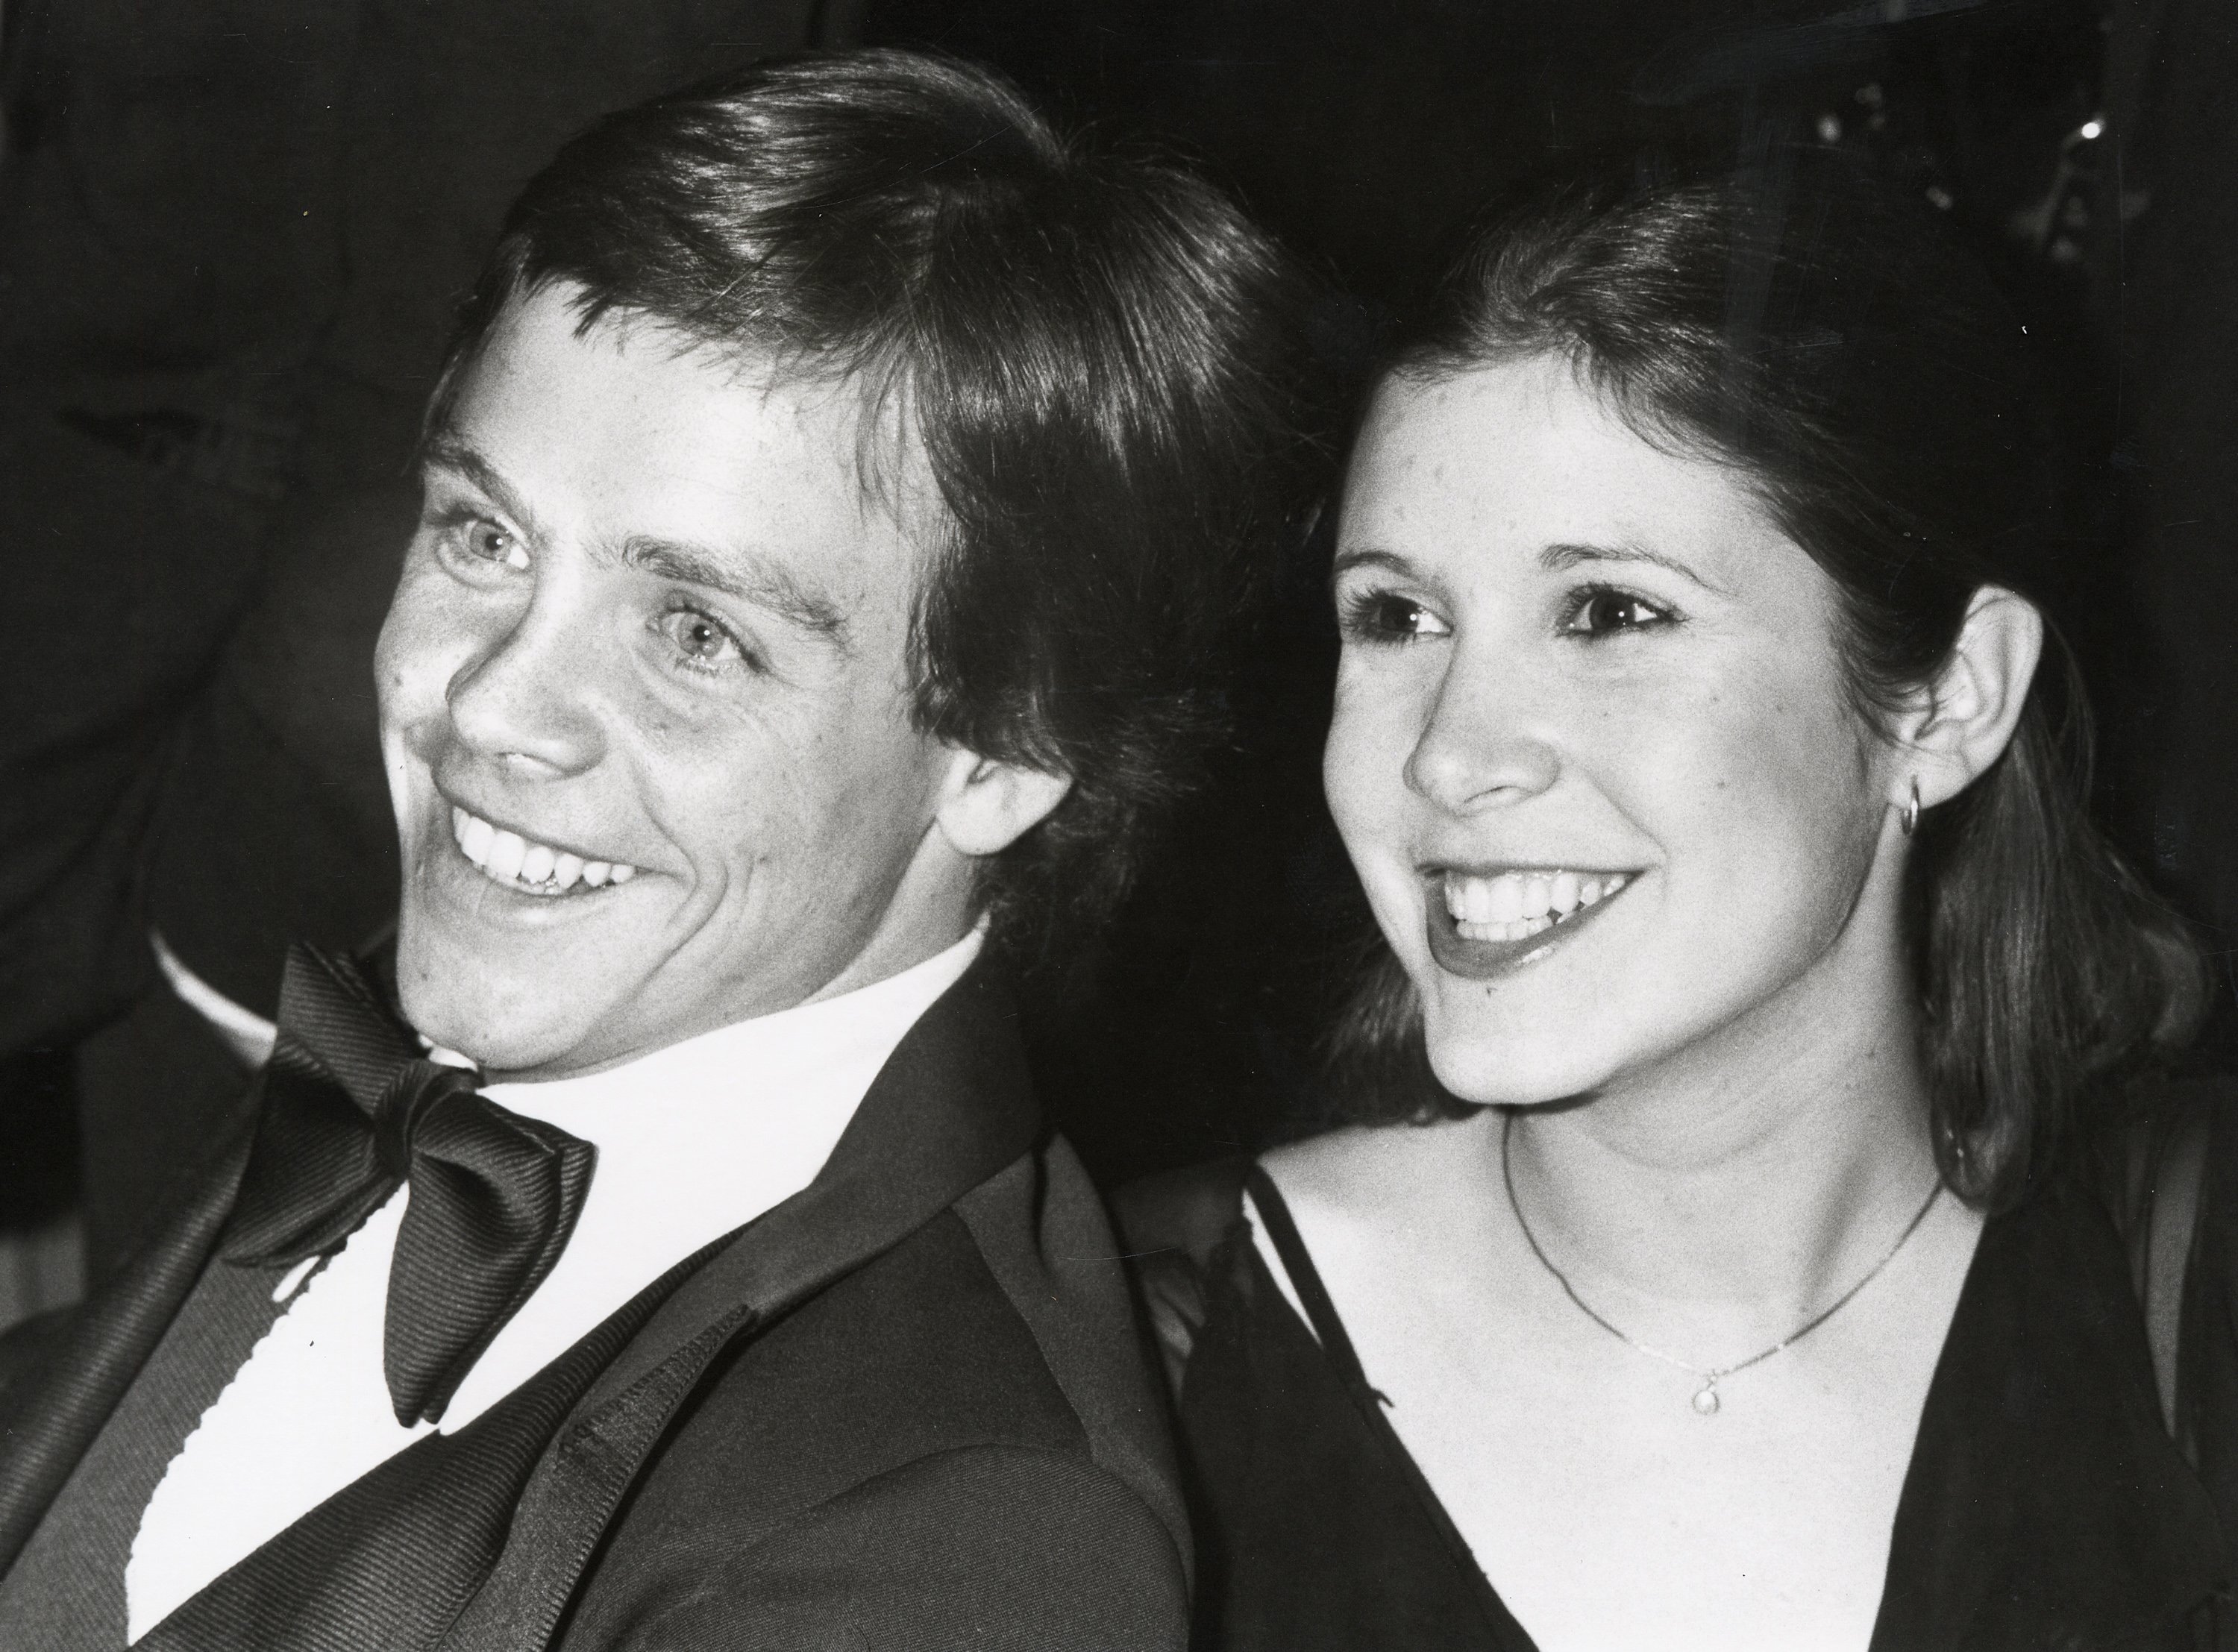 Mark Hamill and Carrie Fisher during American Film Institute 10th Anniversary at Kennedy Center in Washington DC, Maryland, United States. 